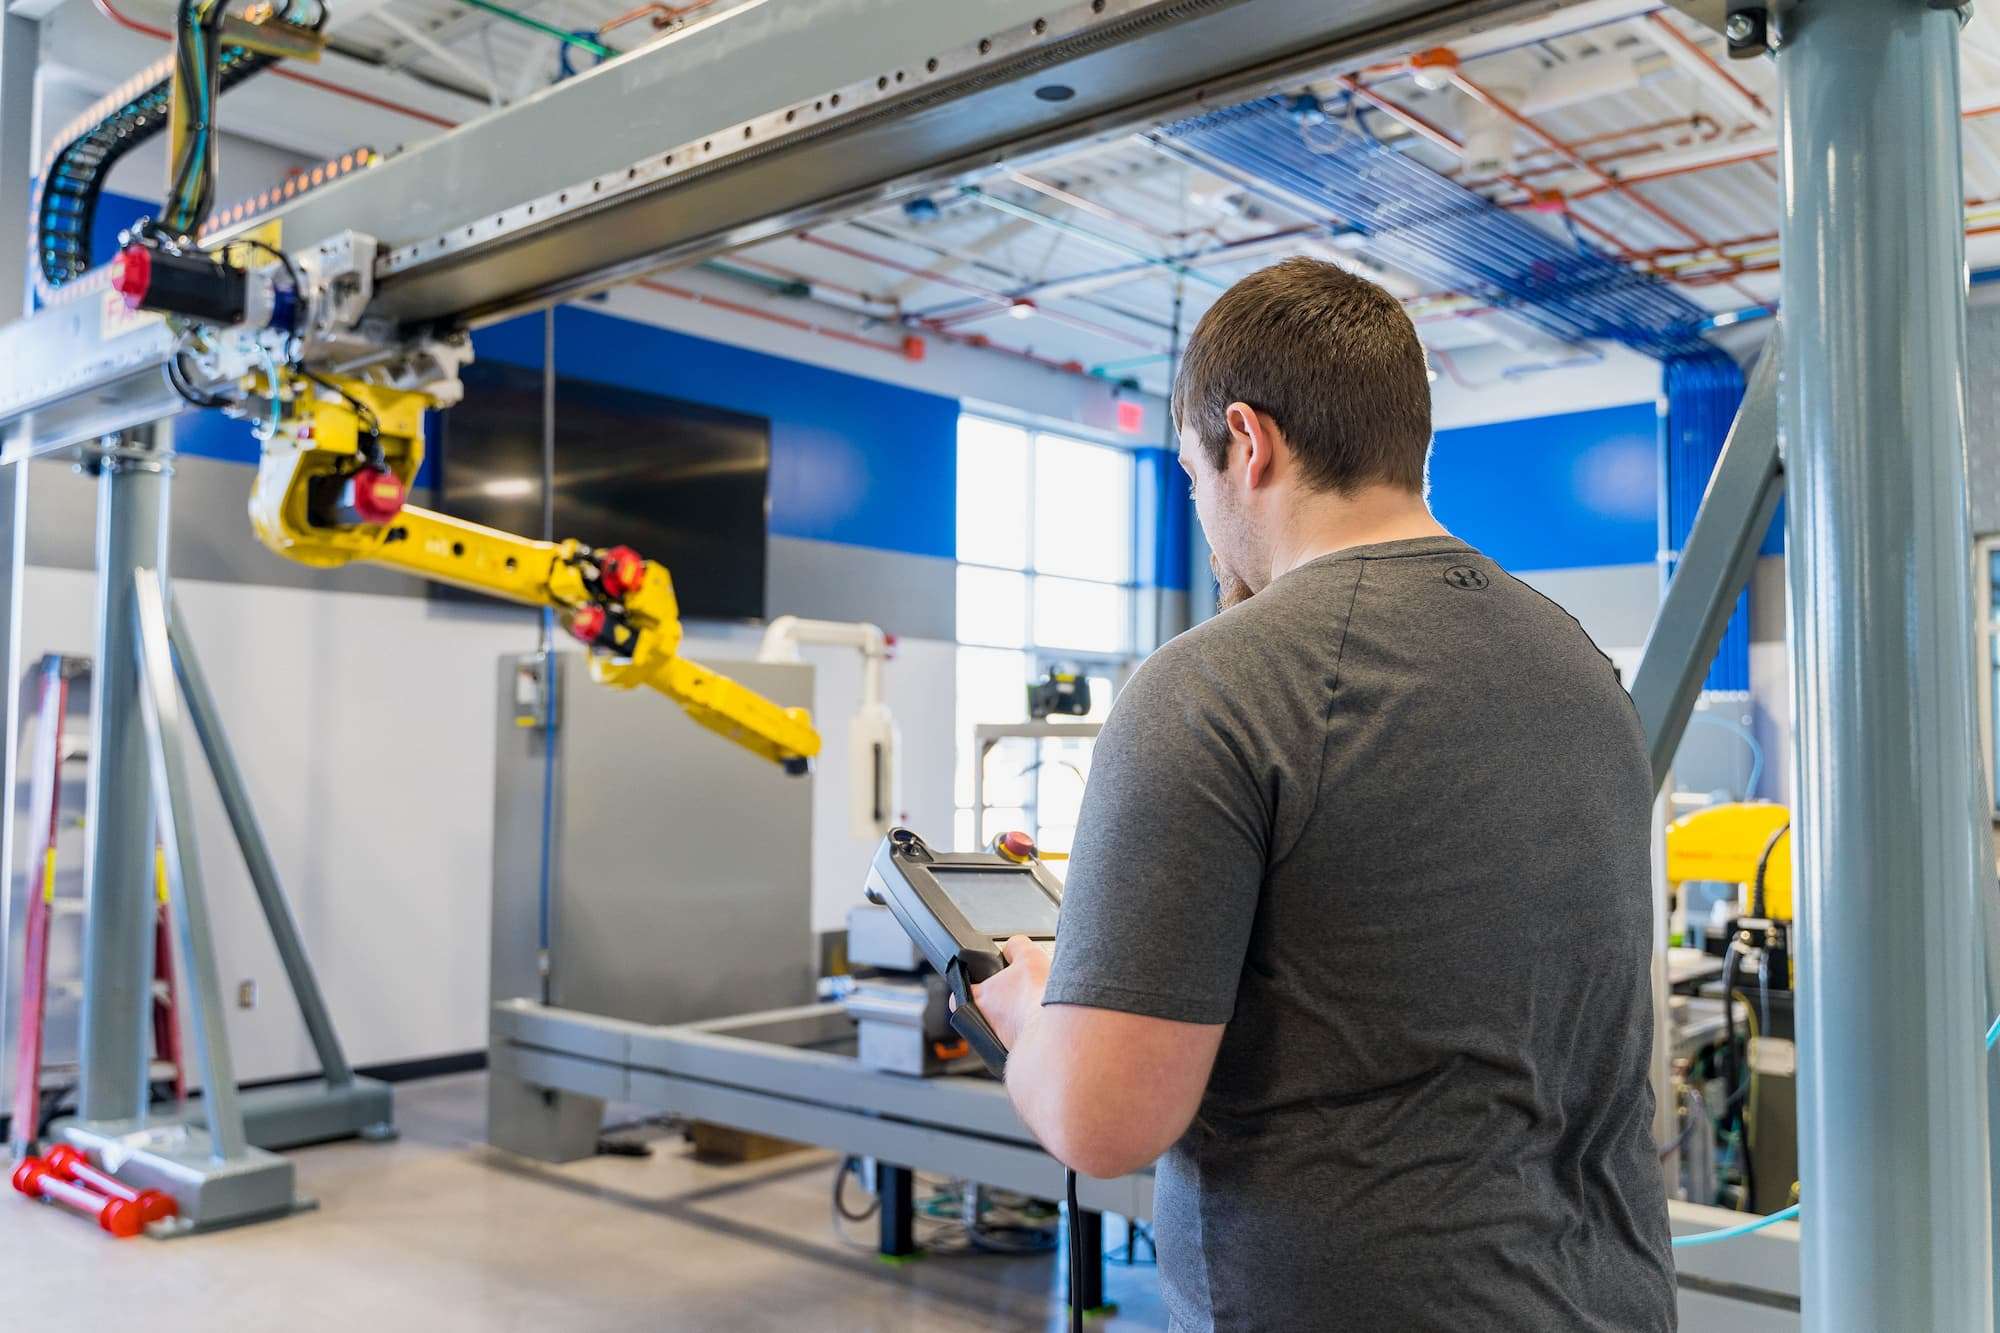 A student stands to operate a large, ceiling-mounted industrial robot.